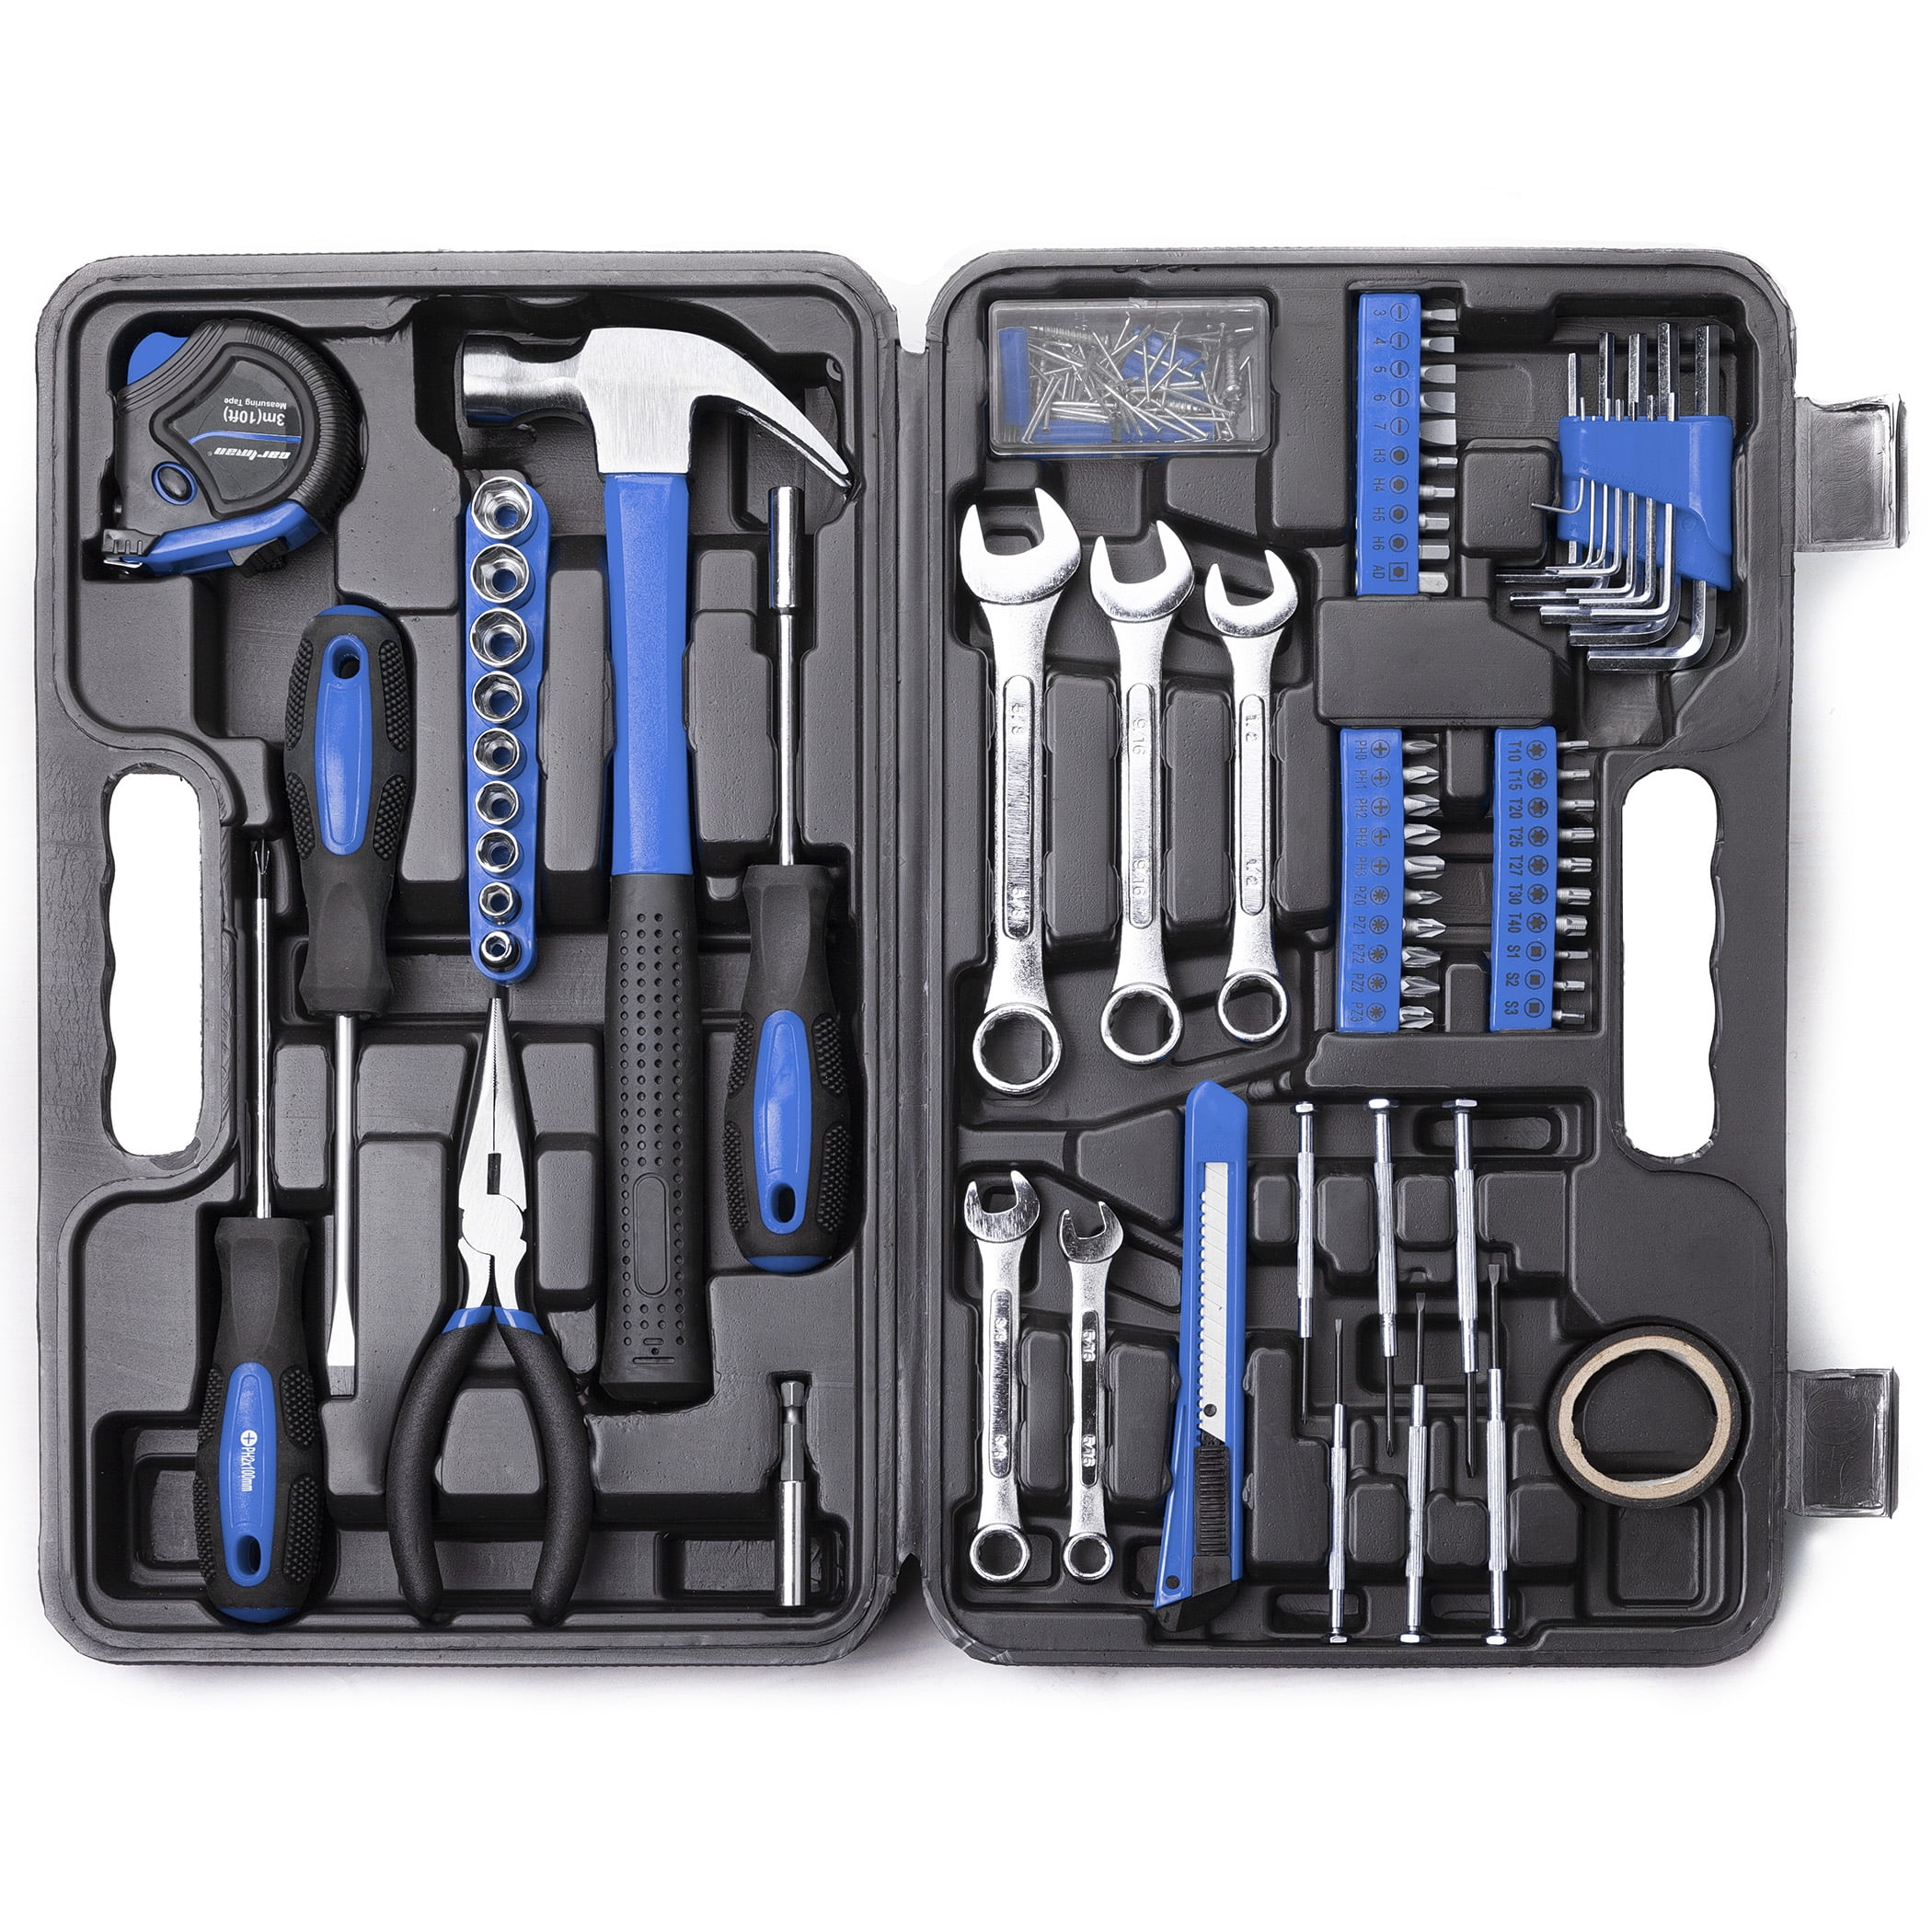 Tool Set Household Hand Tool Kit With Plastic Toolbox Storage Case